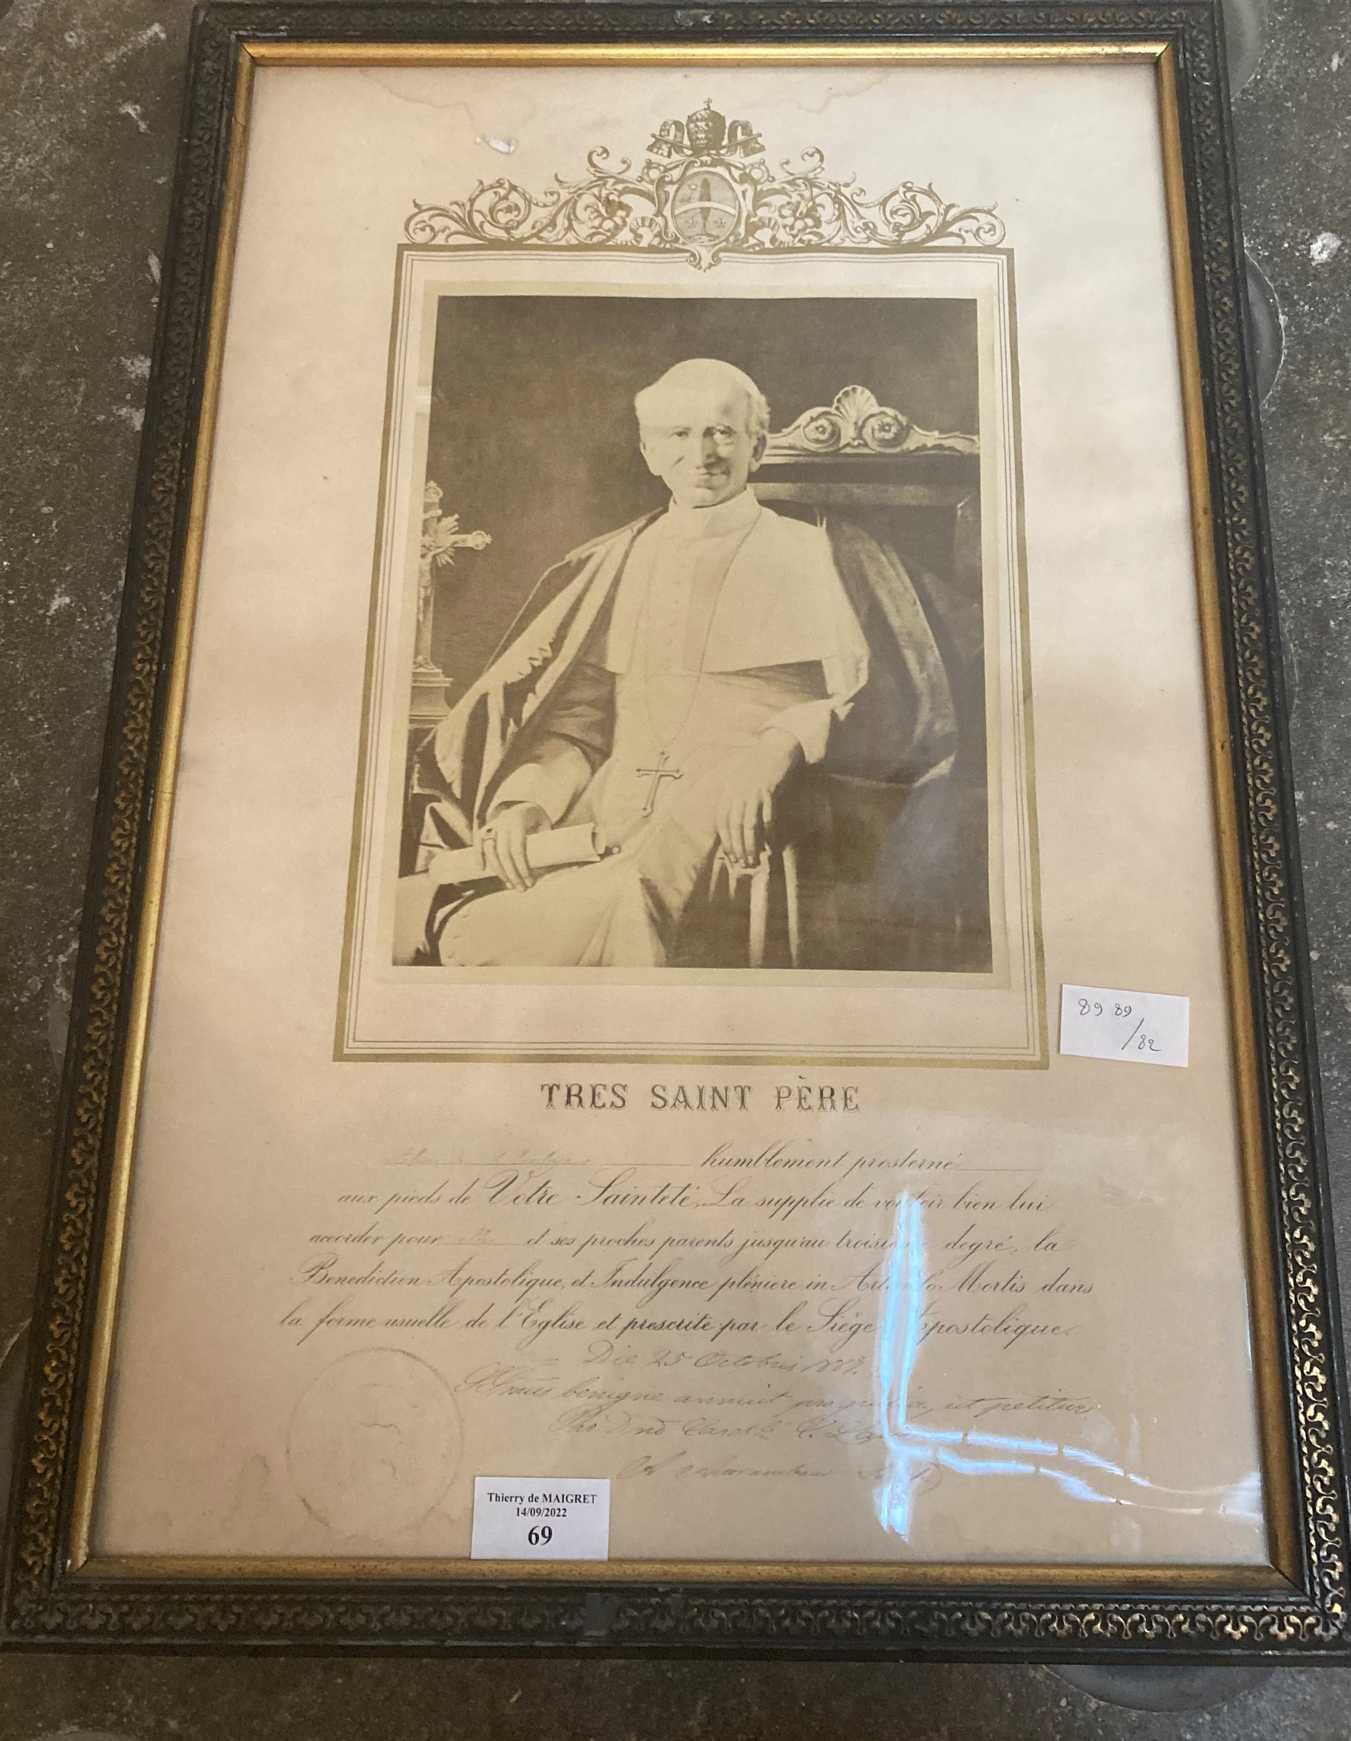 Null Framed photo of Pope Leo XIII 

25 x 19 cm (frame 54 x 37 cm)

insolate